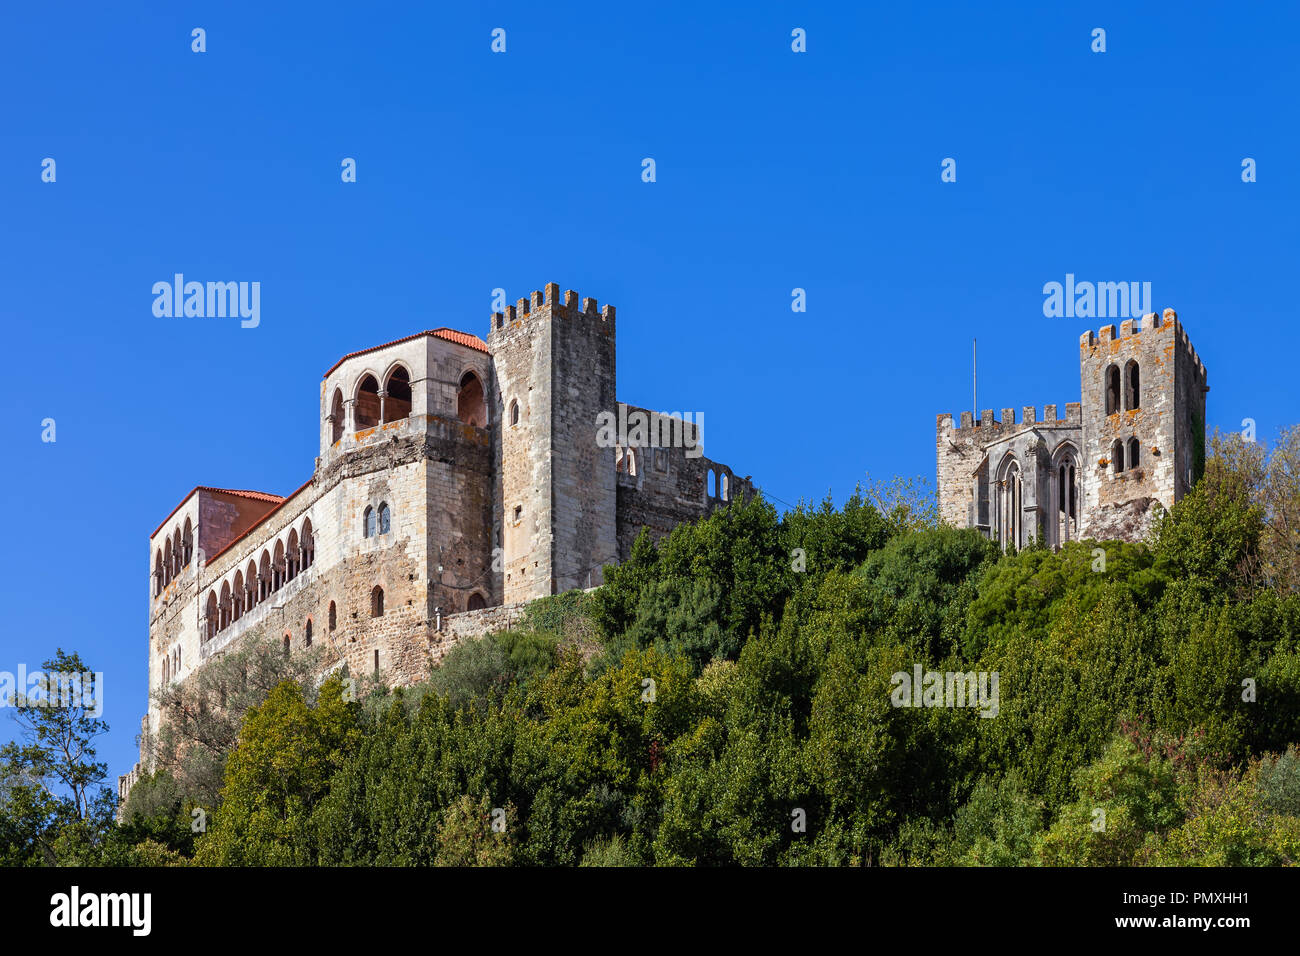 Medieval Leiria Castle built on top of a hill with a view over the Gothic Palatial Residence or Pacos Novos. A Templar Knights Castle. Portugal Stock Photo